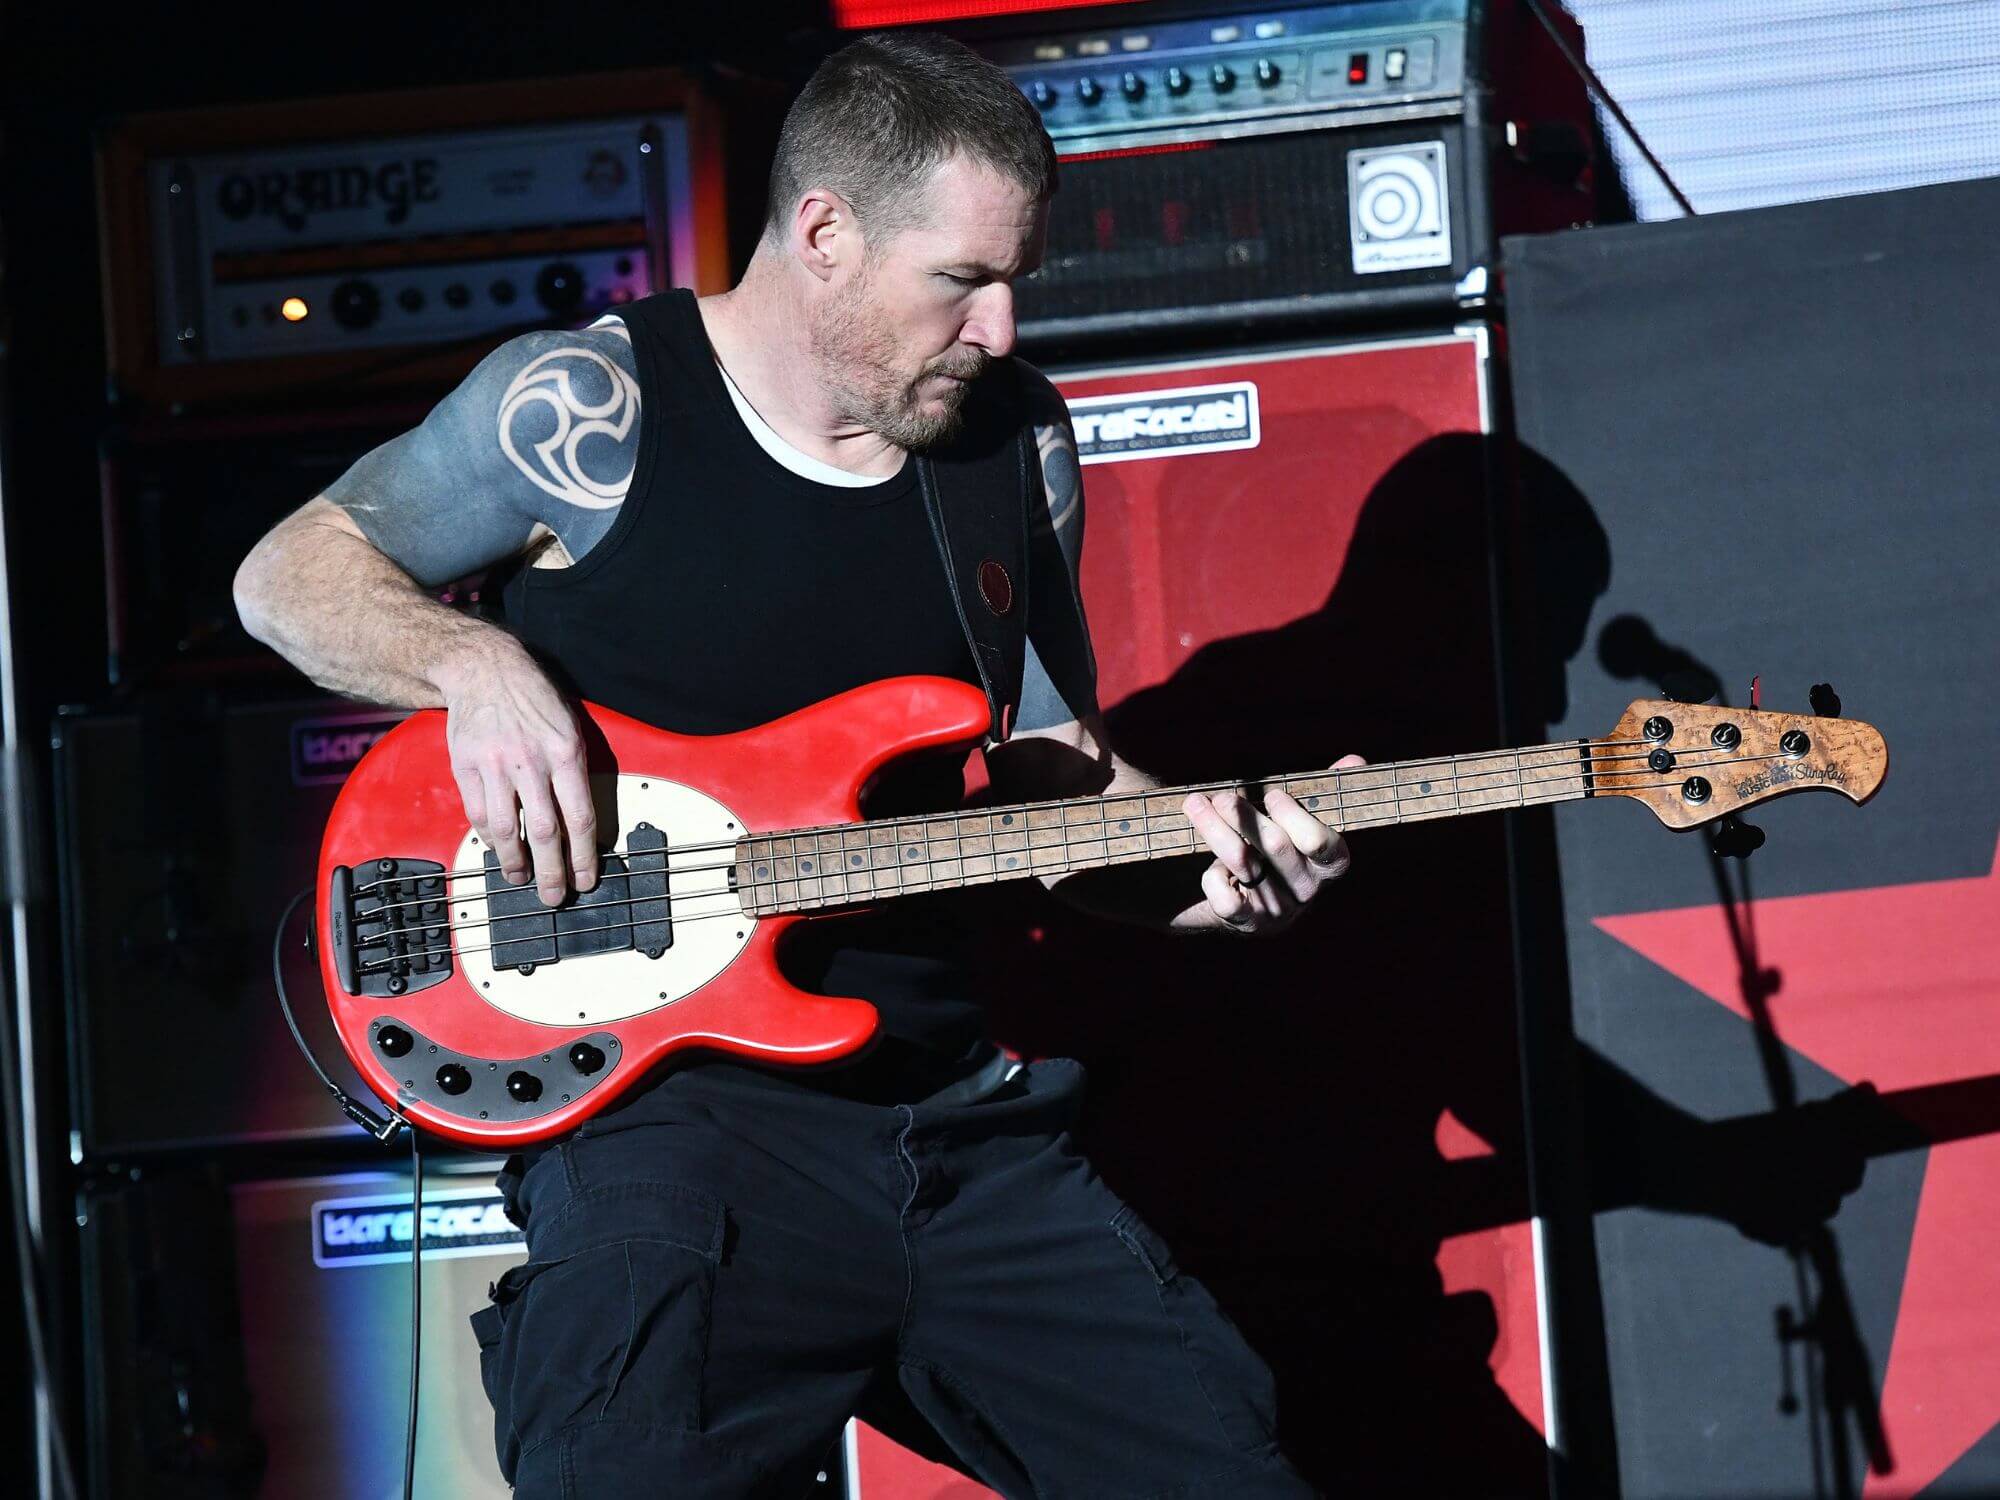 Rage Against The Machine bassist Tim Commerford